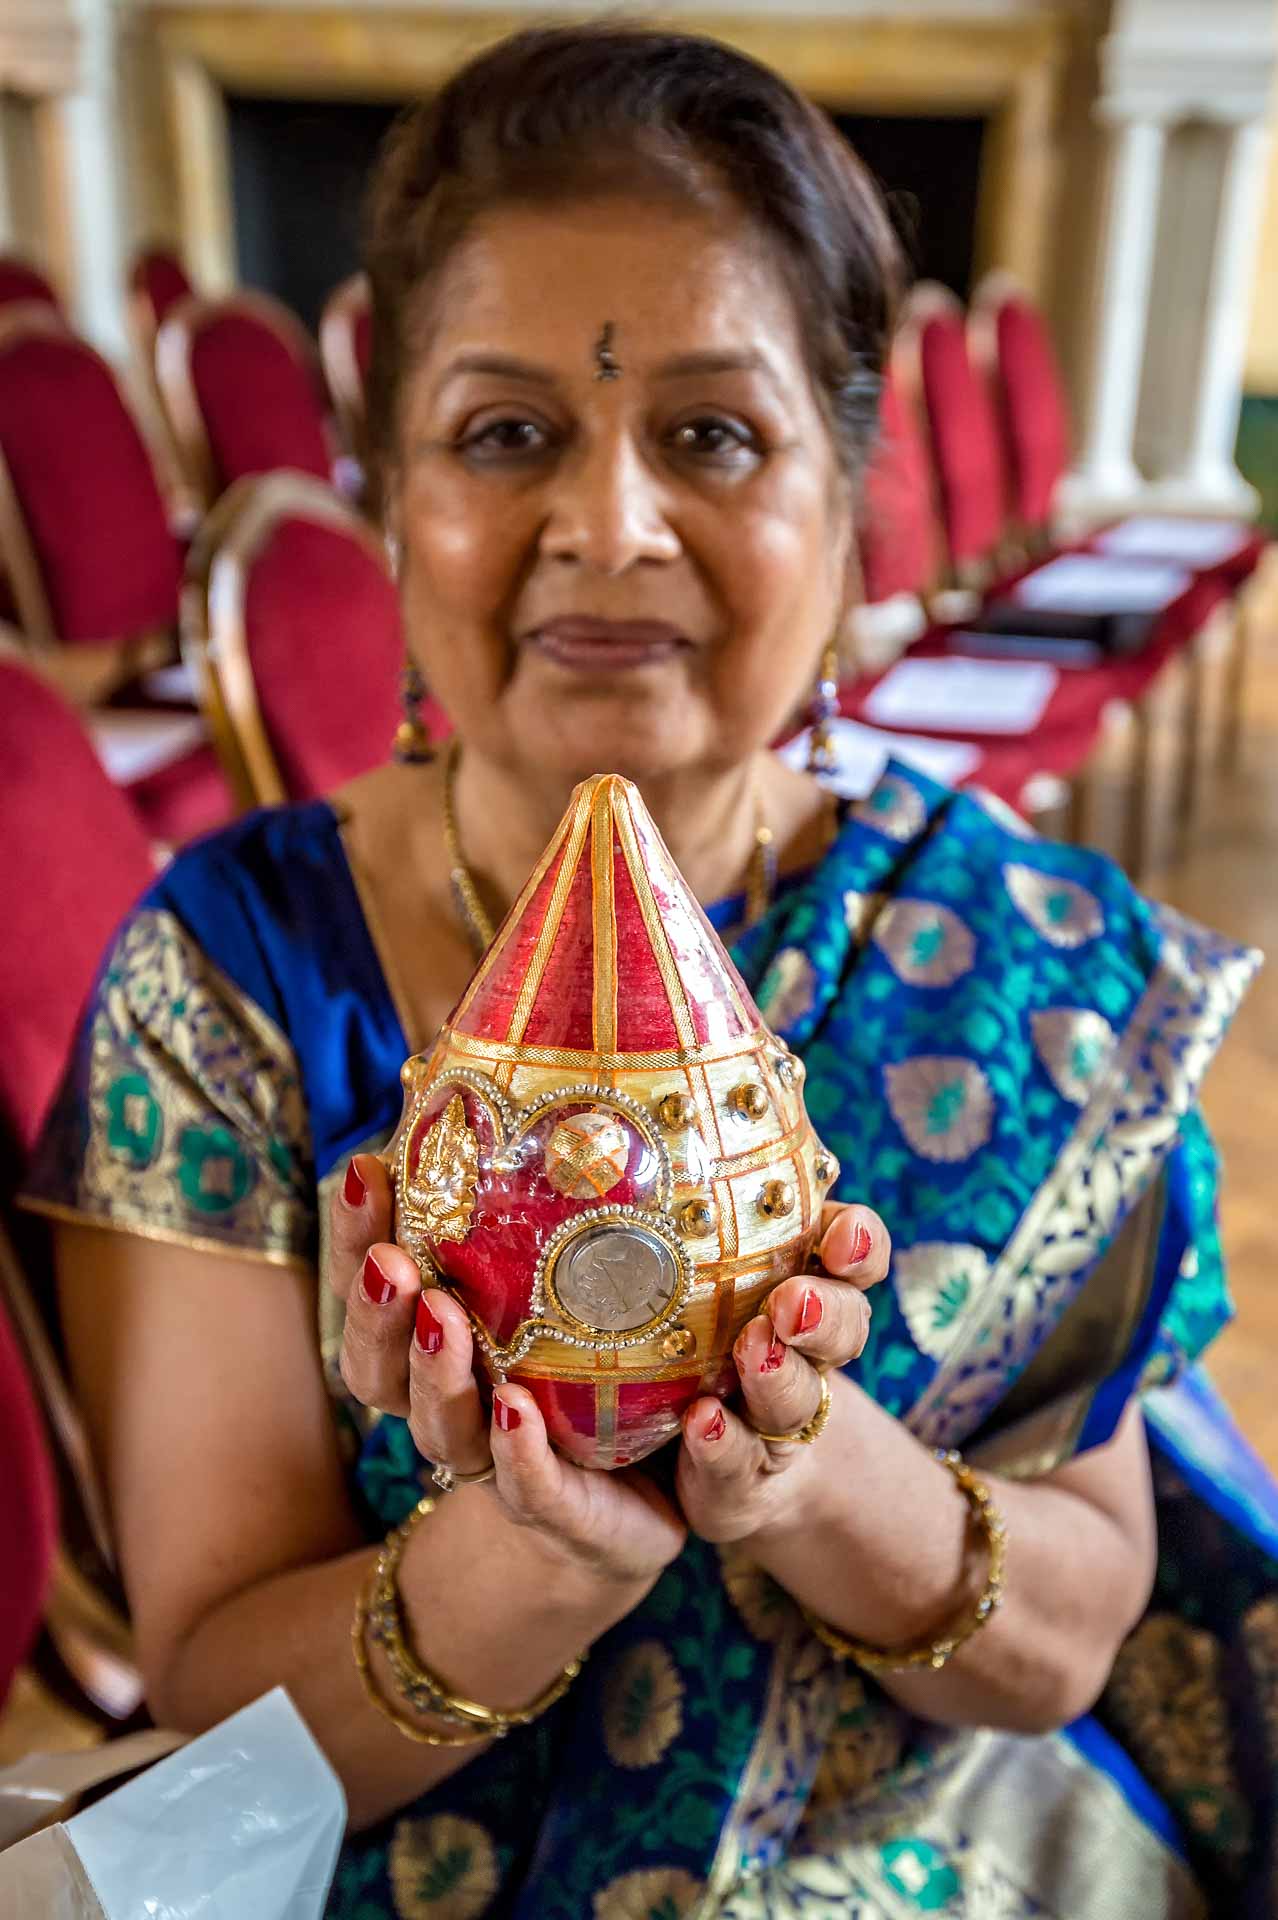 Bride's Indian mother holding the decorated coconut at Indian wedding